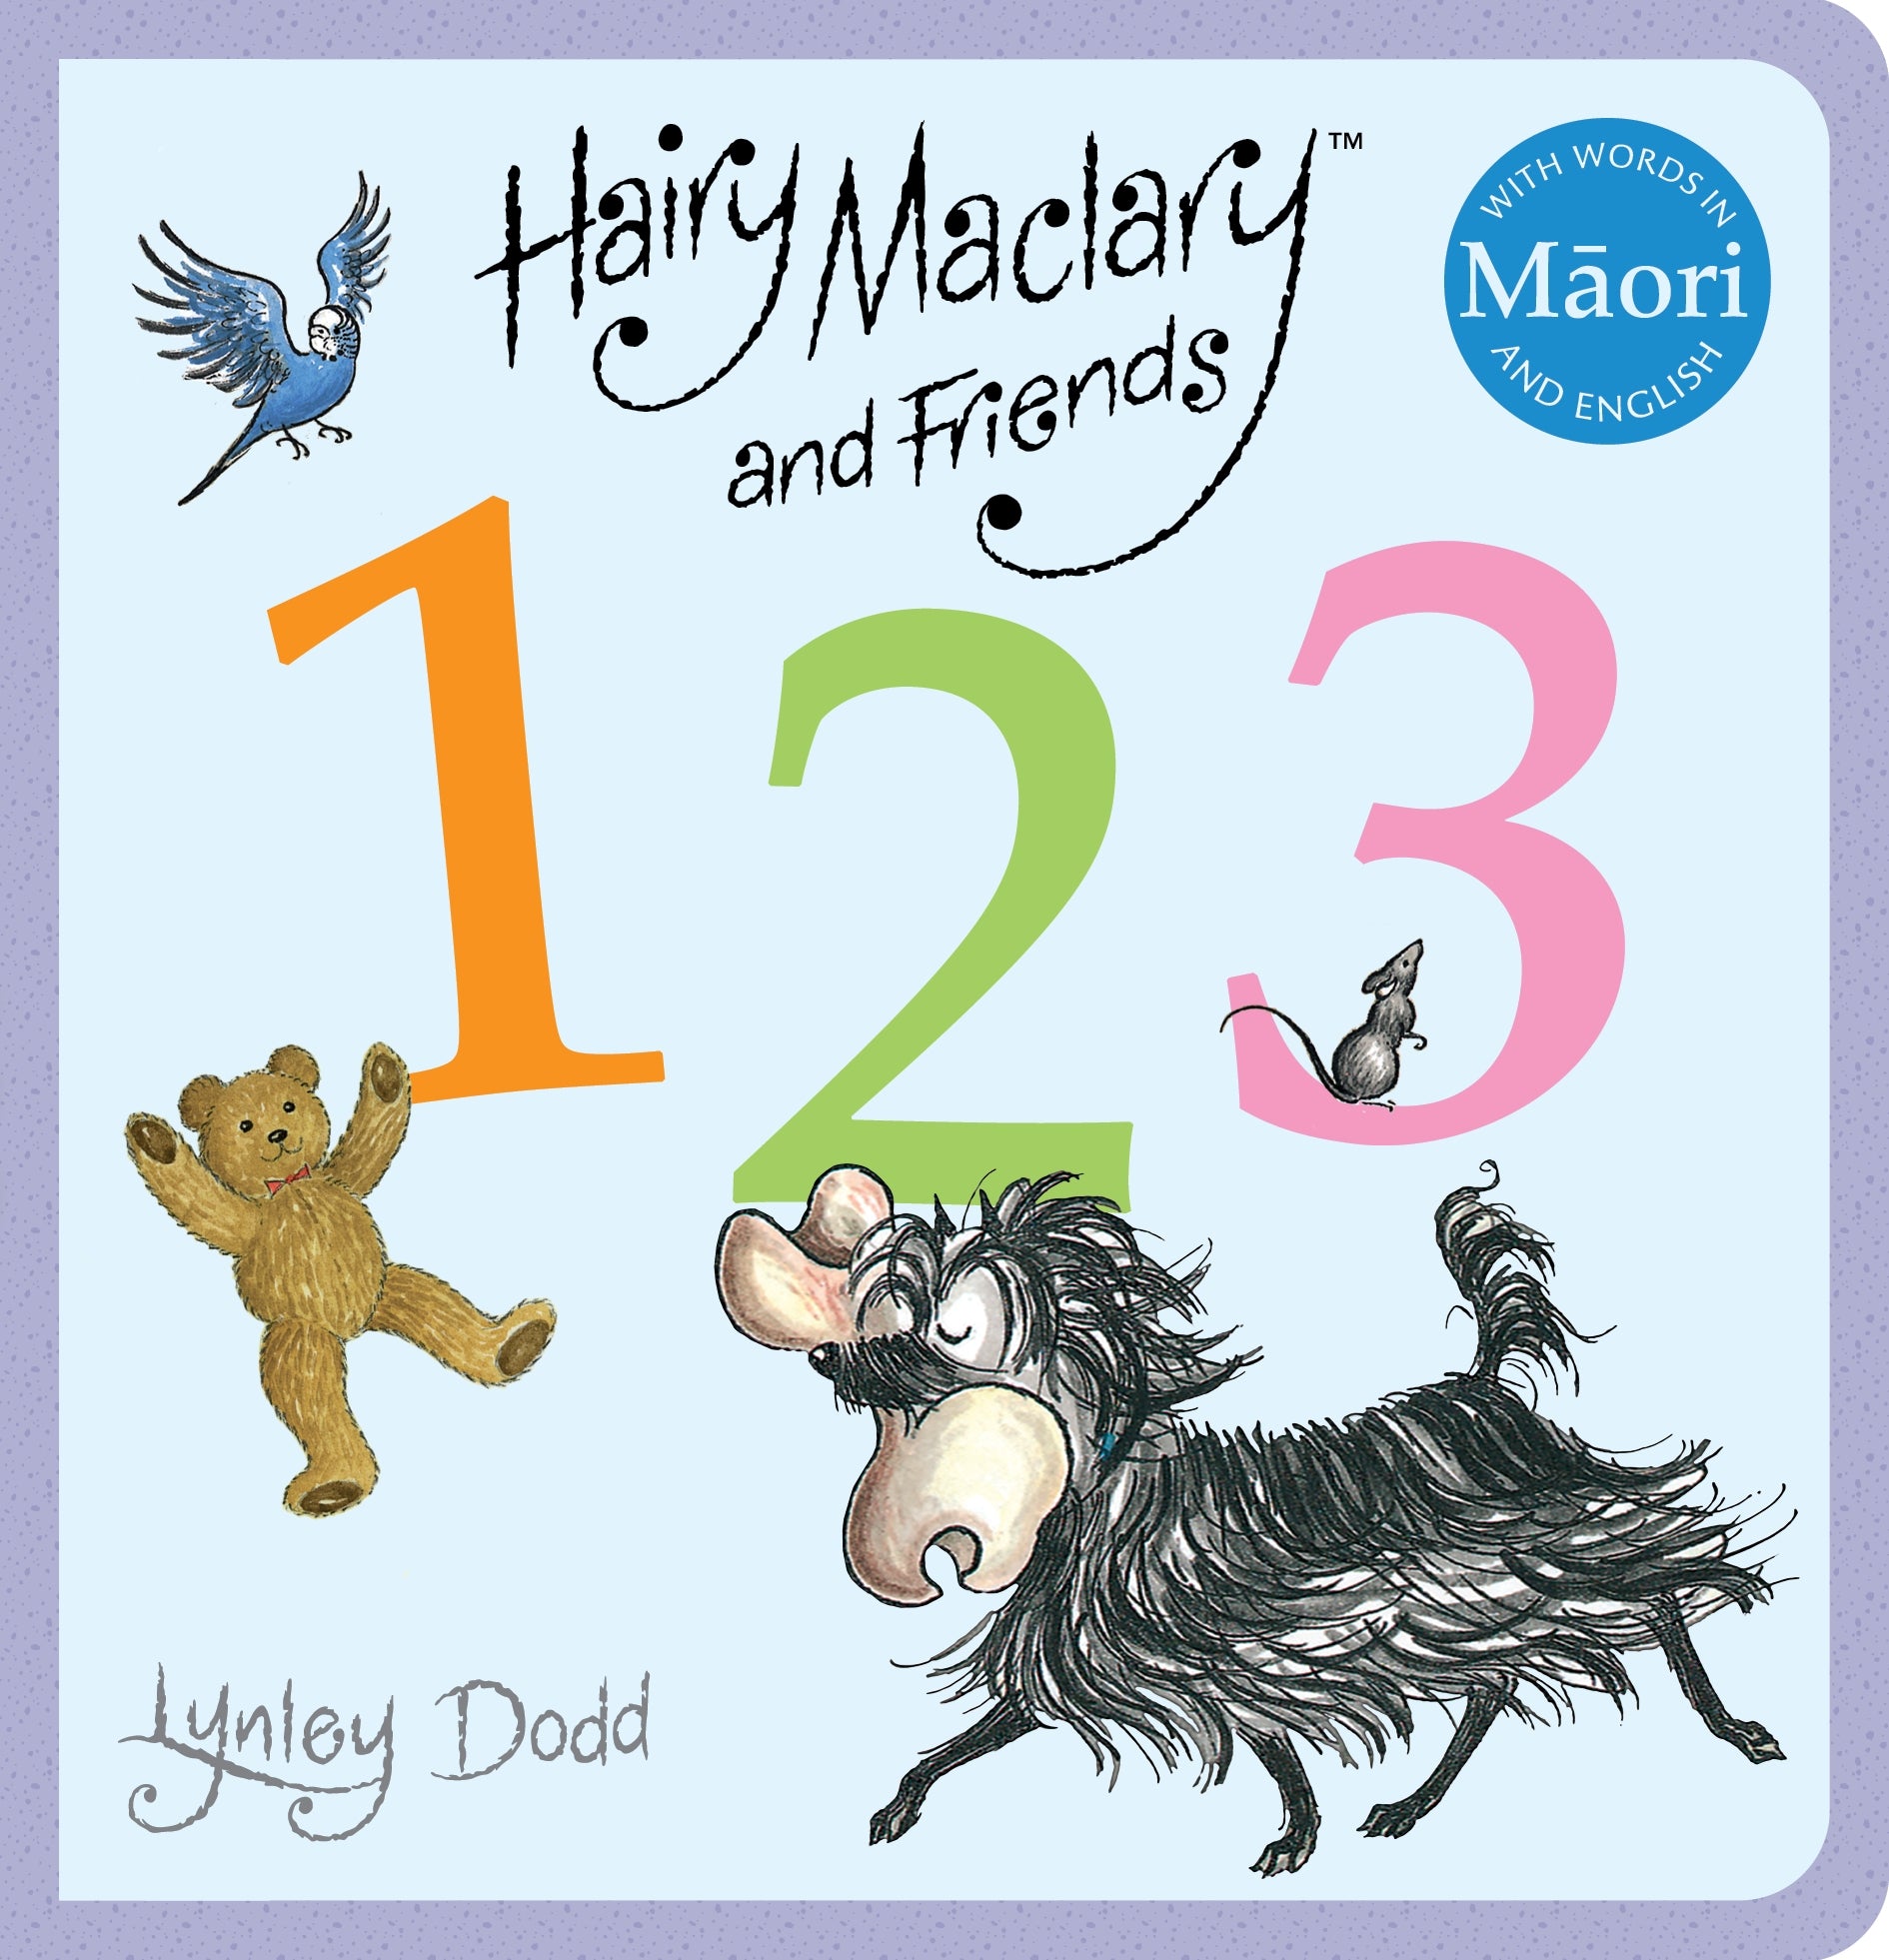 Penguin Books Hairy Maclary and Friends counting book from Bear & Moo